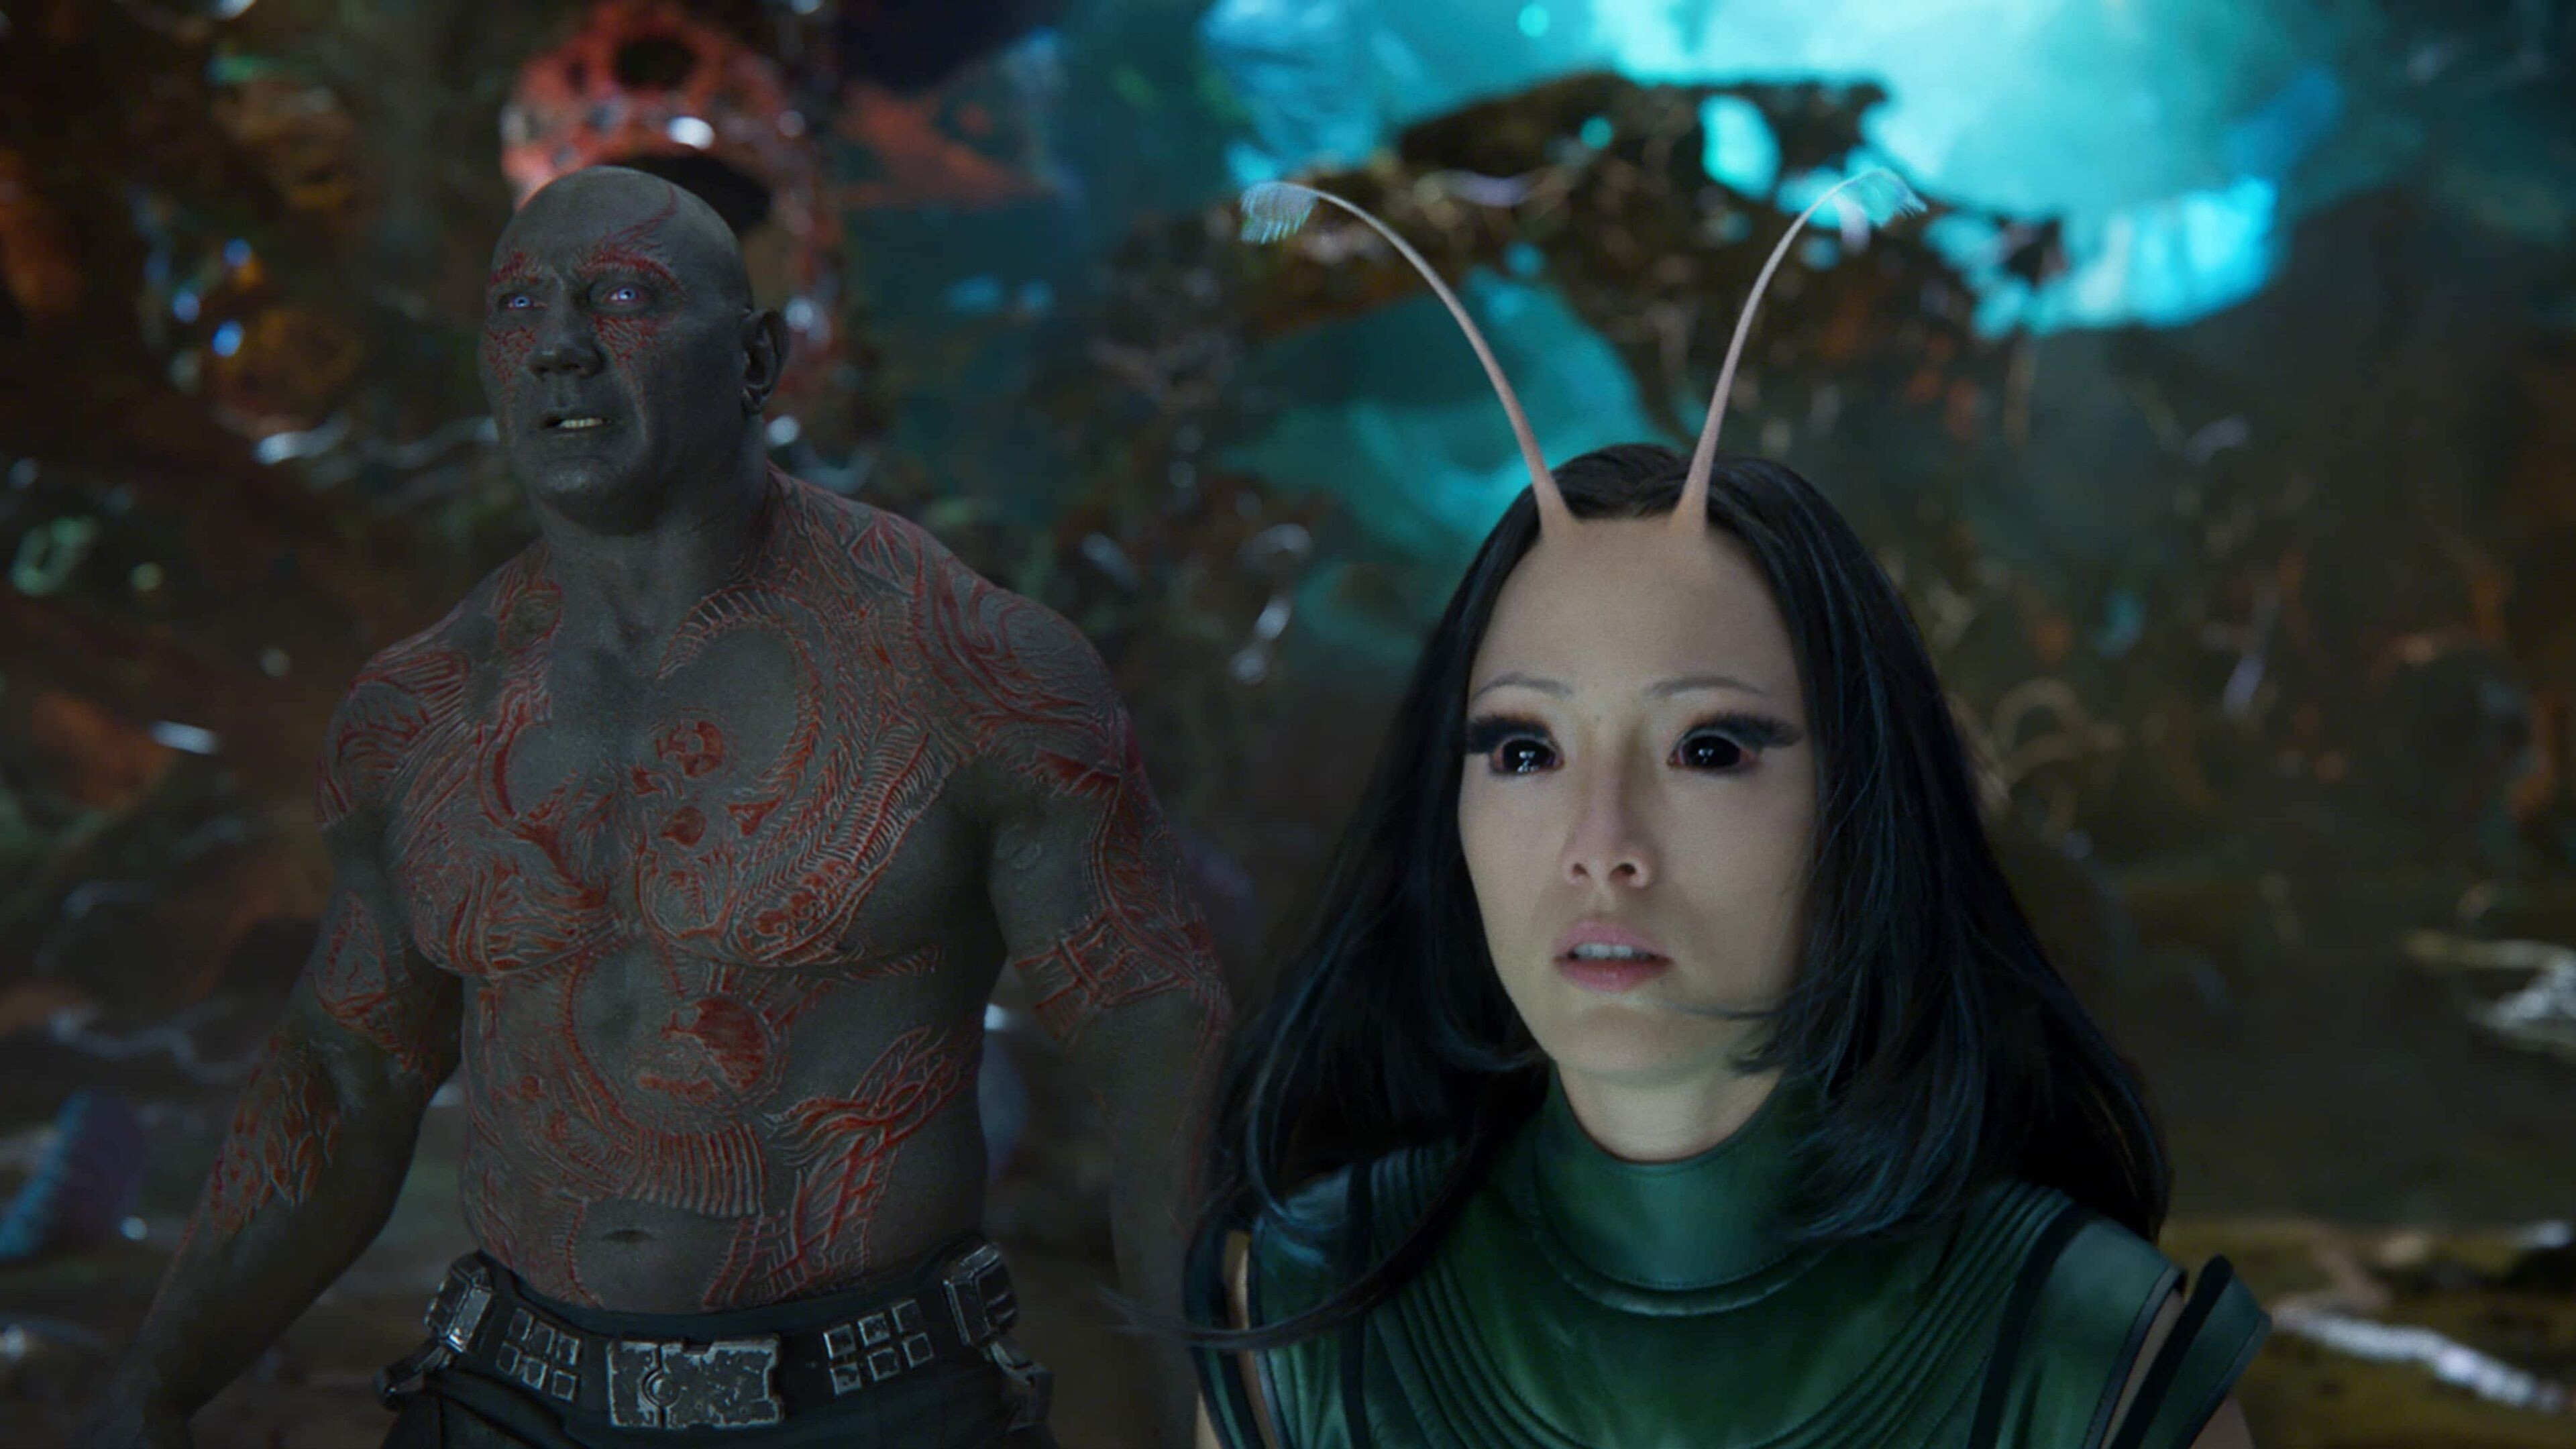 Pom Klementieff: Dave Bautista as Drax the Destroyer, Mantis, Guardians of the Galaxy Vol. 2. 3840x2160 4K Background.